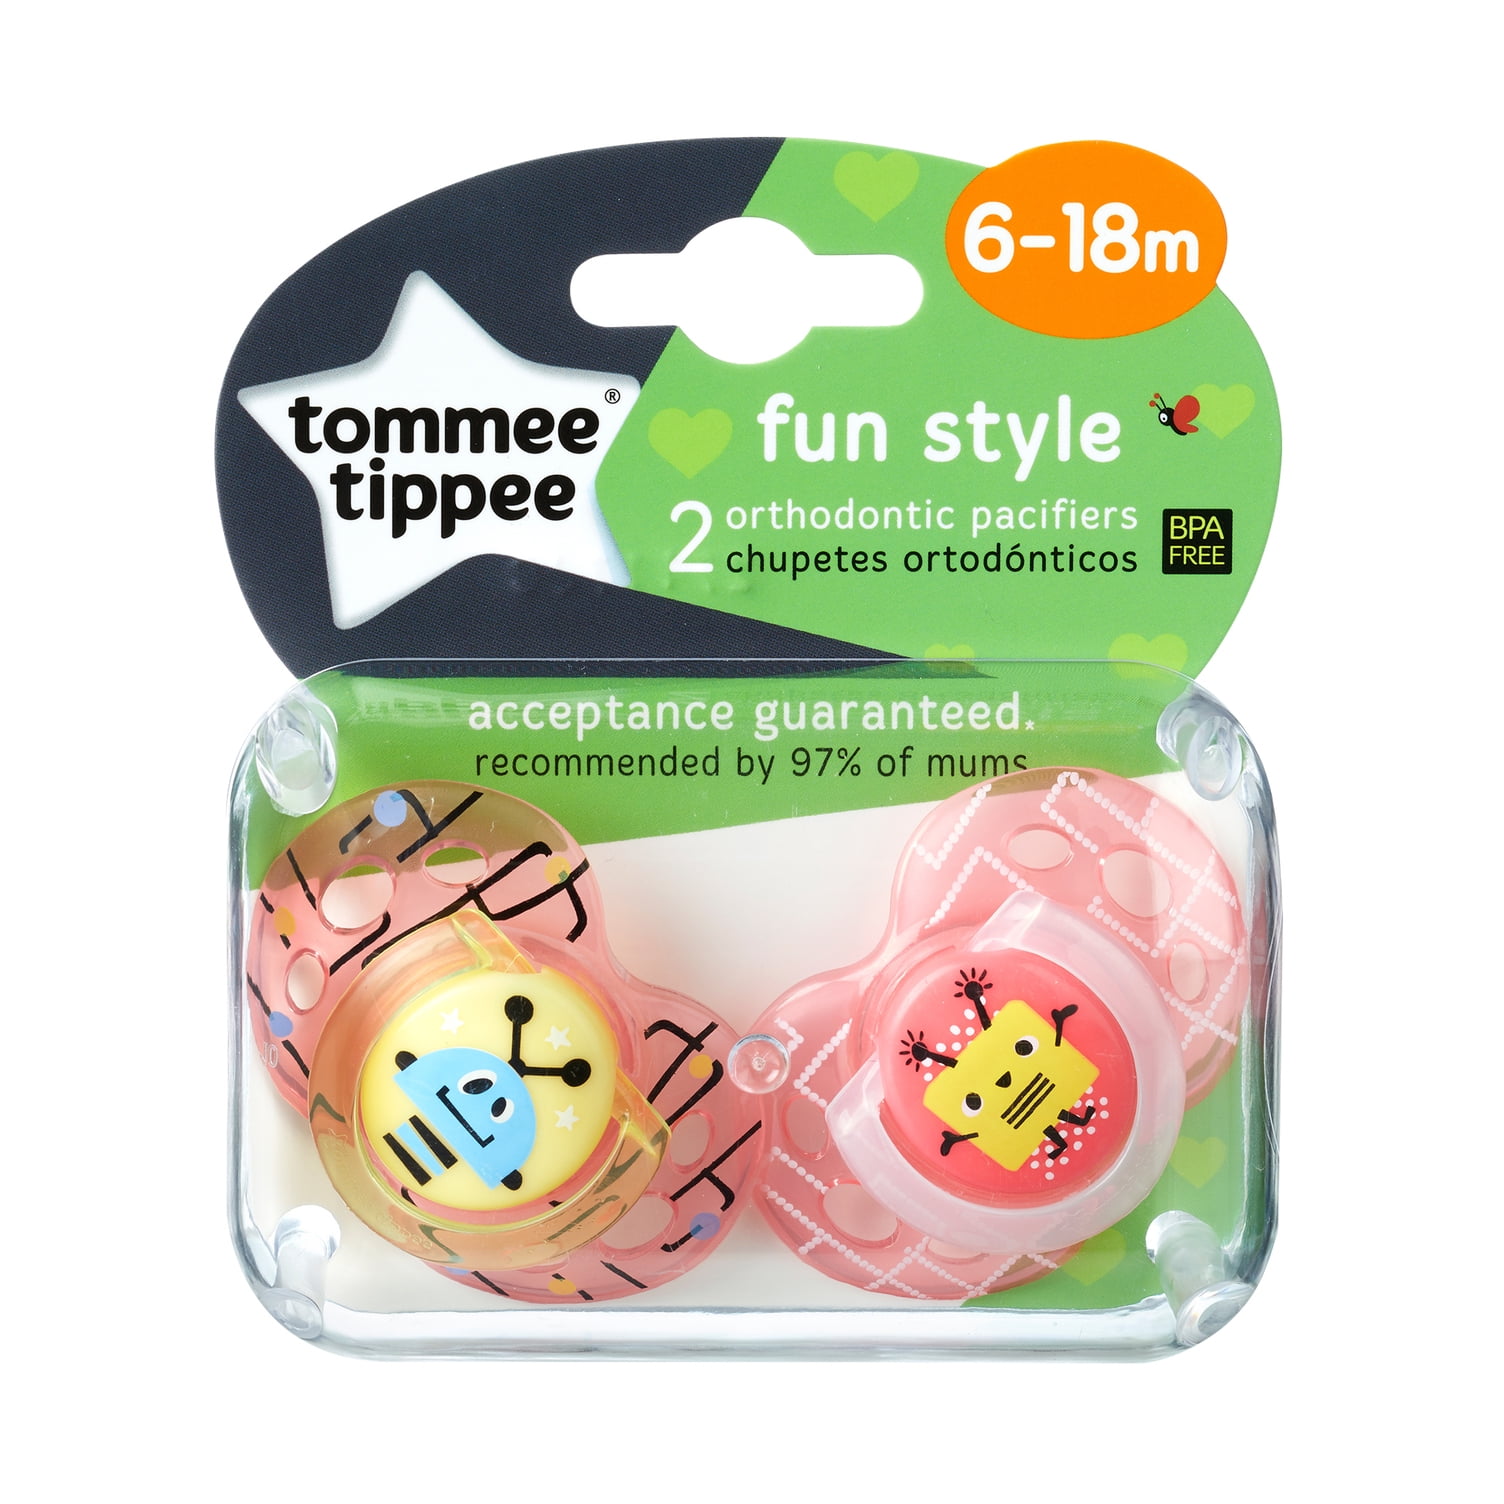 Tommee Tippee Closer to Nature 433358 Fun Style 6-18m Shooters x 2 